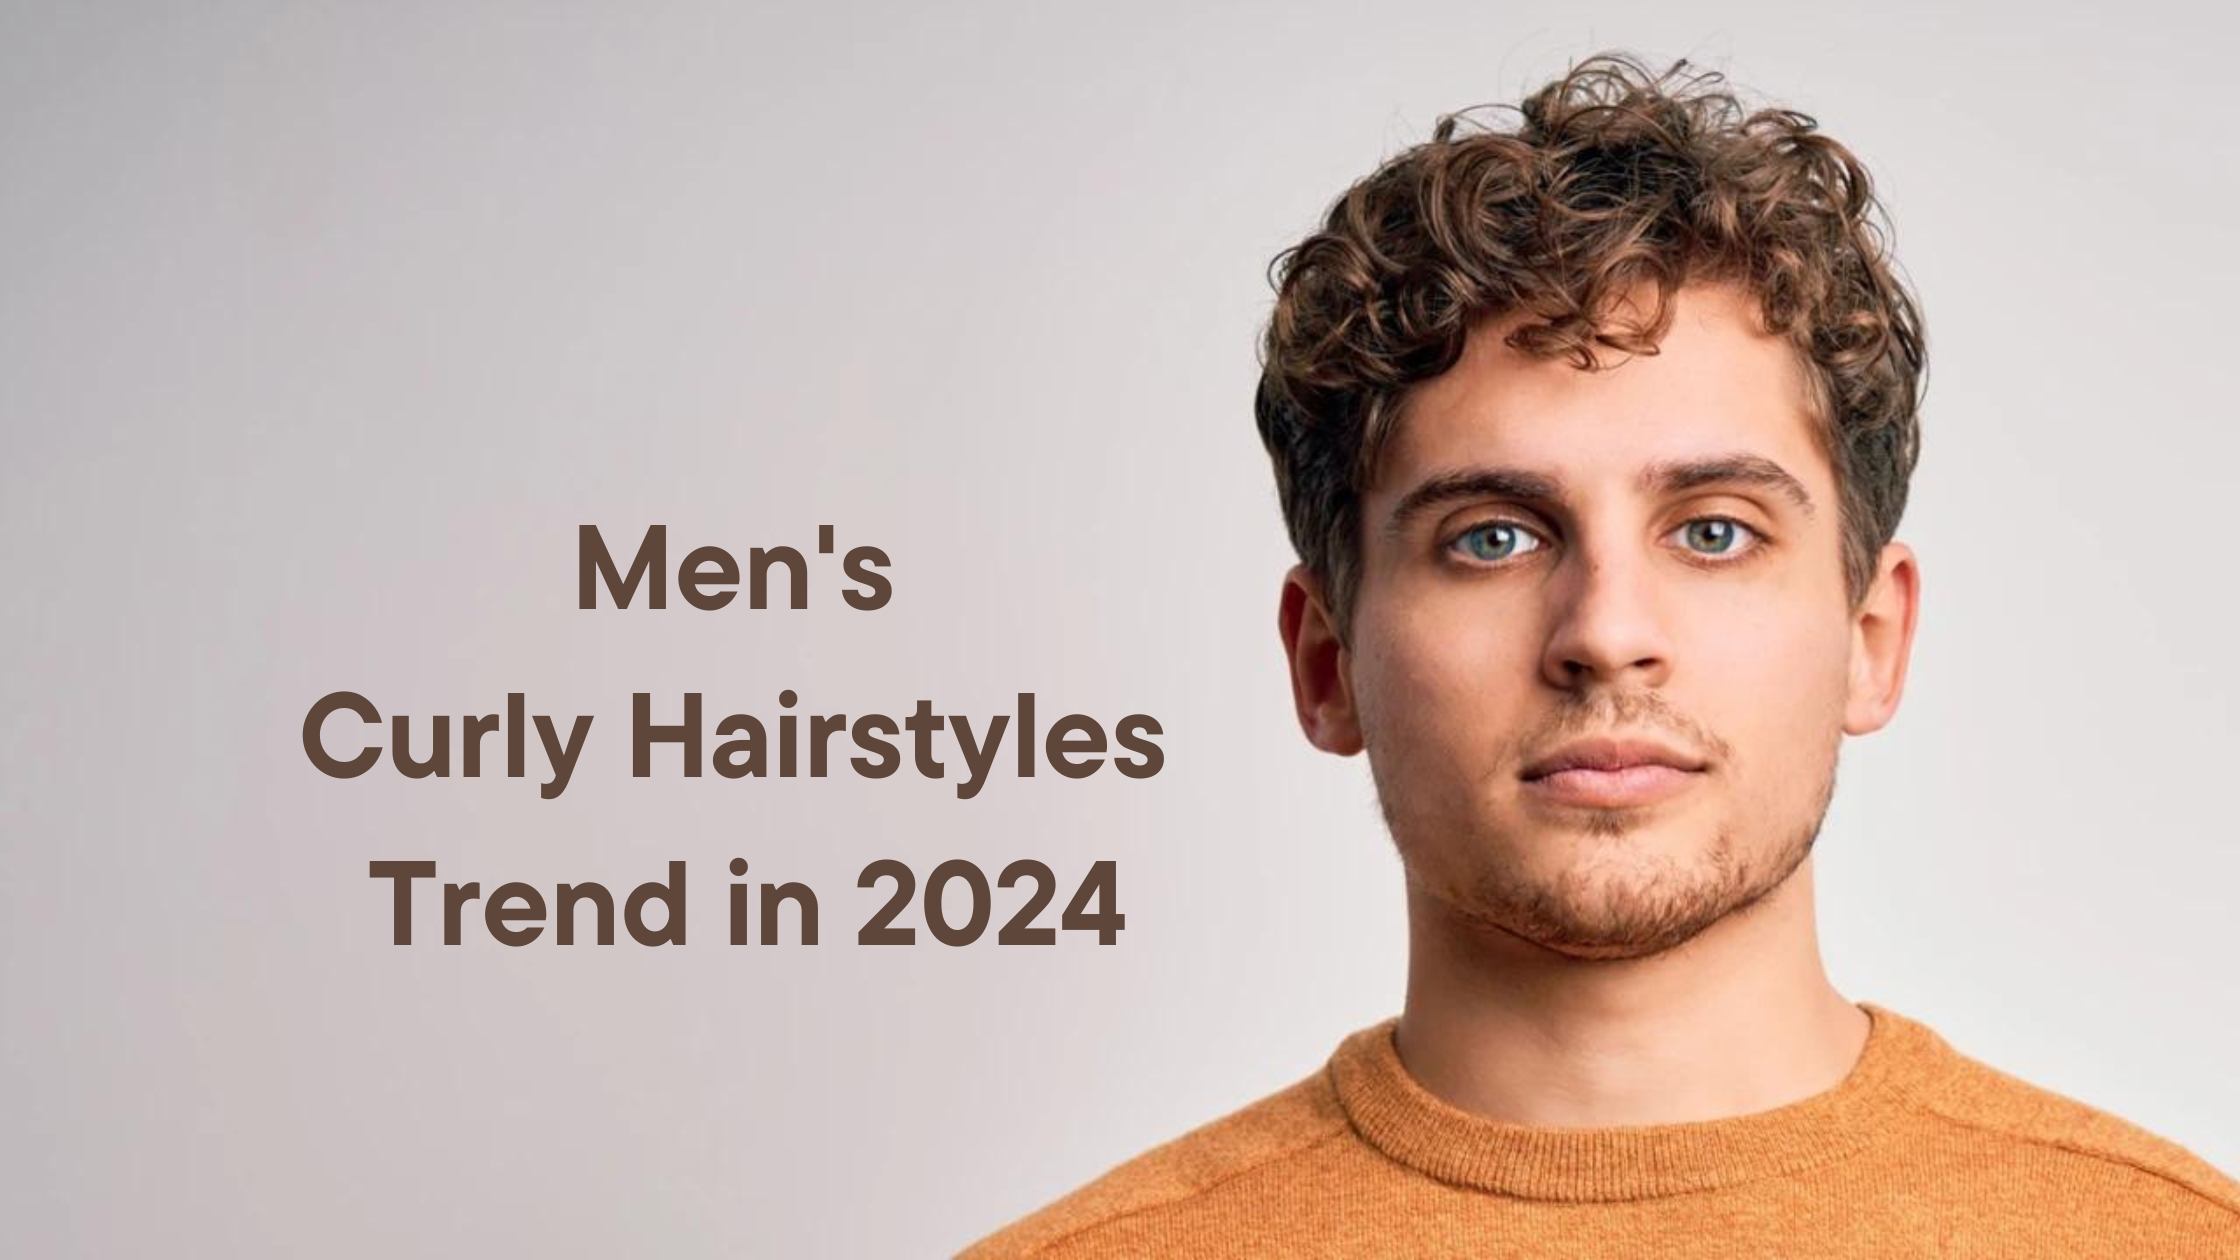 Coolest Trend Men's Curly Hairstyles in 2024 l Curly Hair Inspiration